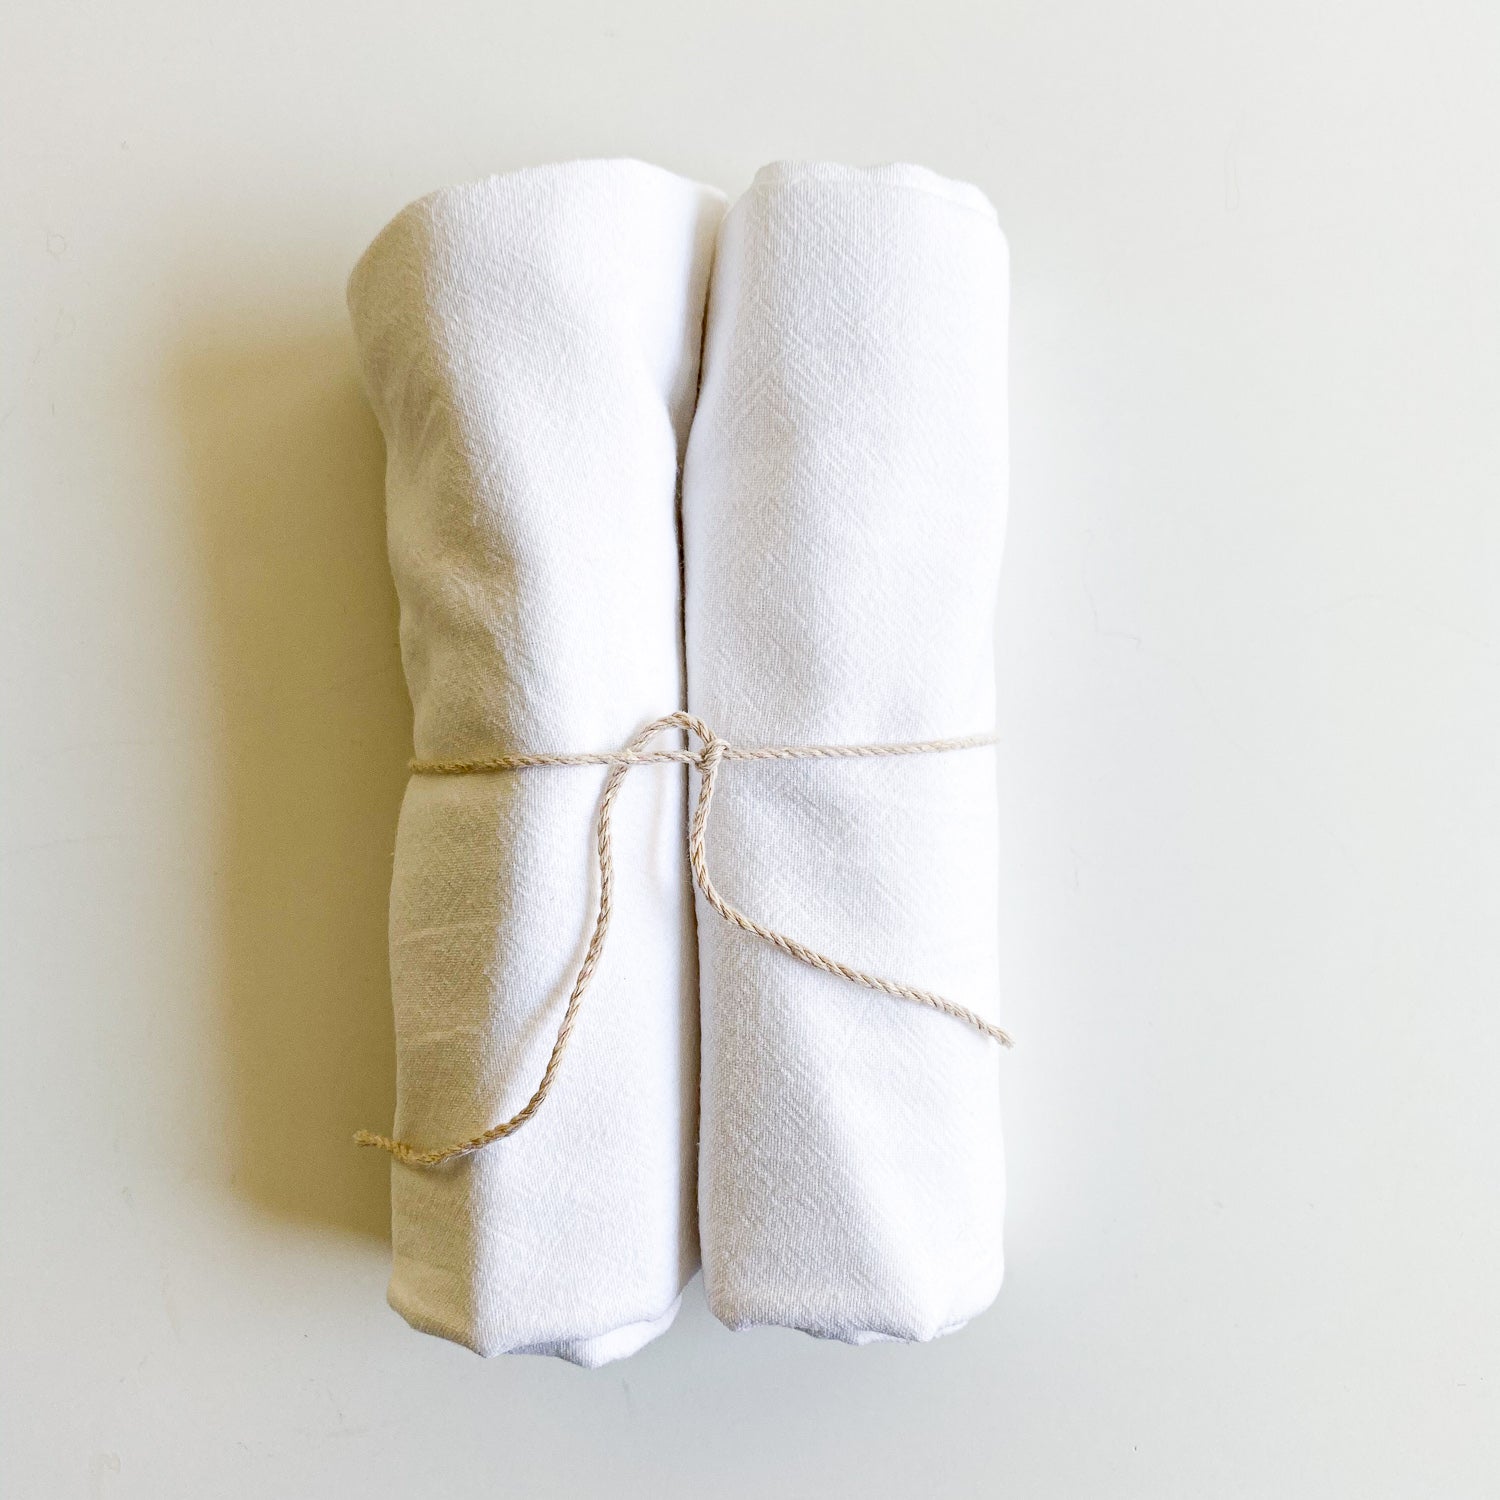 Flour Sack Dish Towels (set of two, 27" x 27")